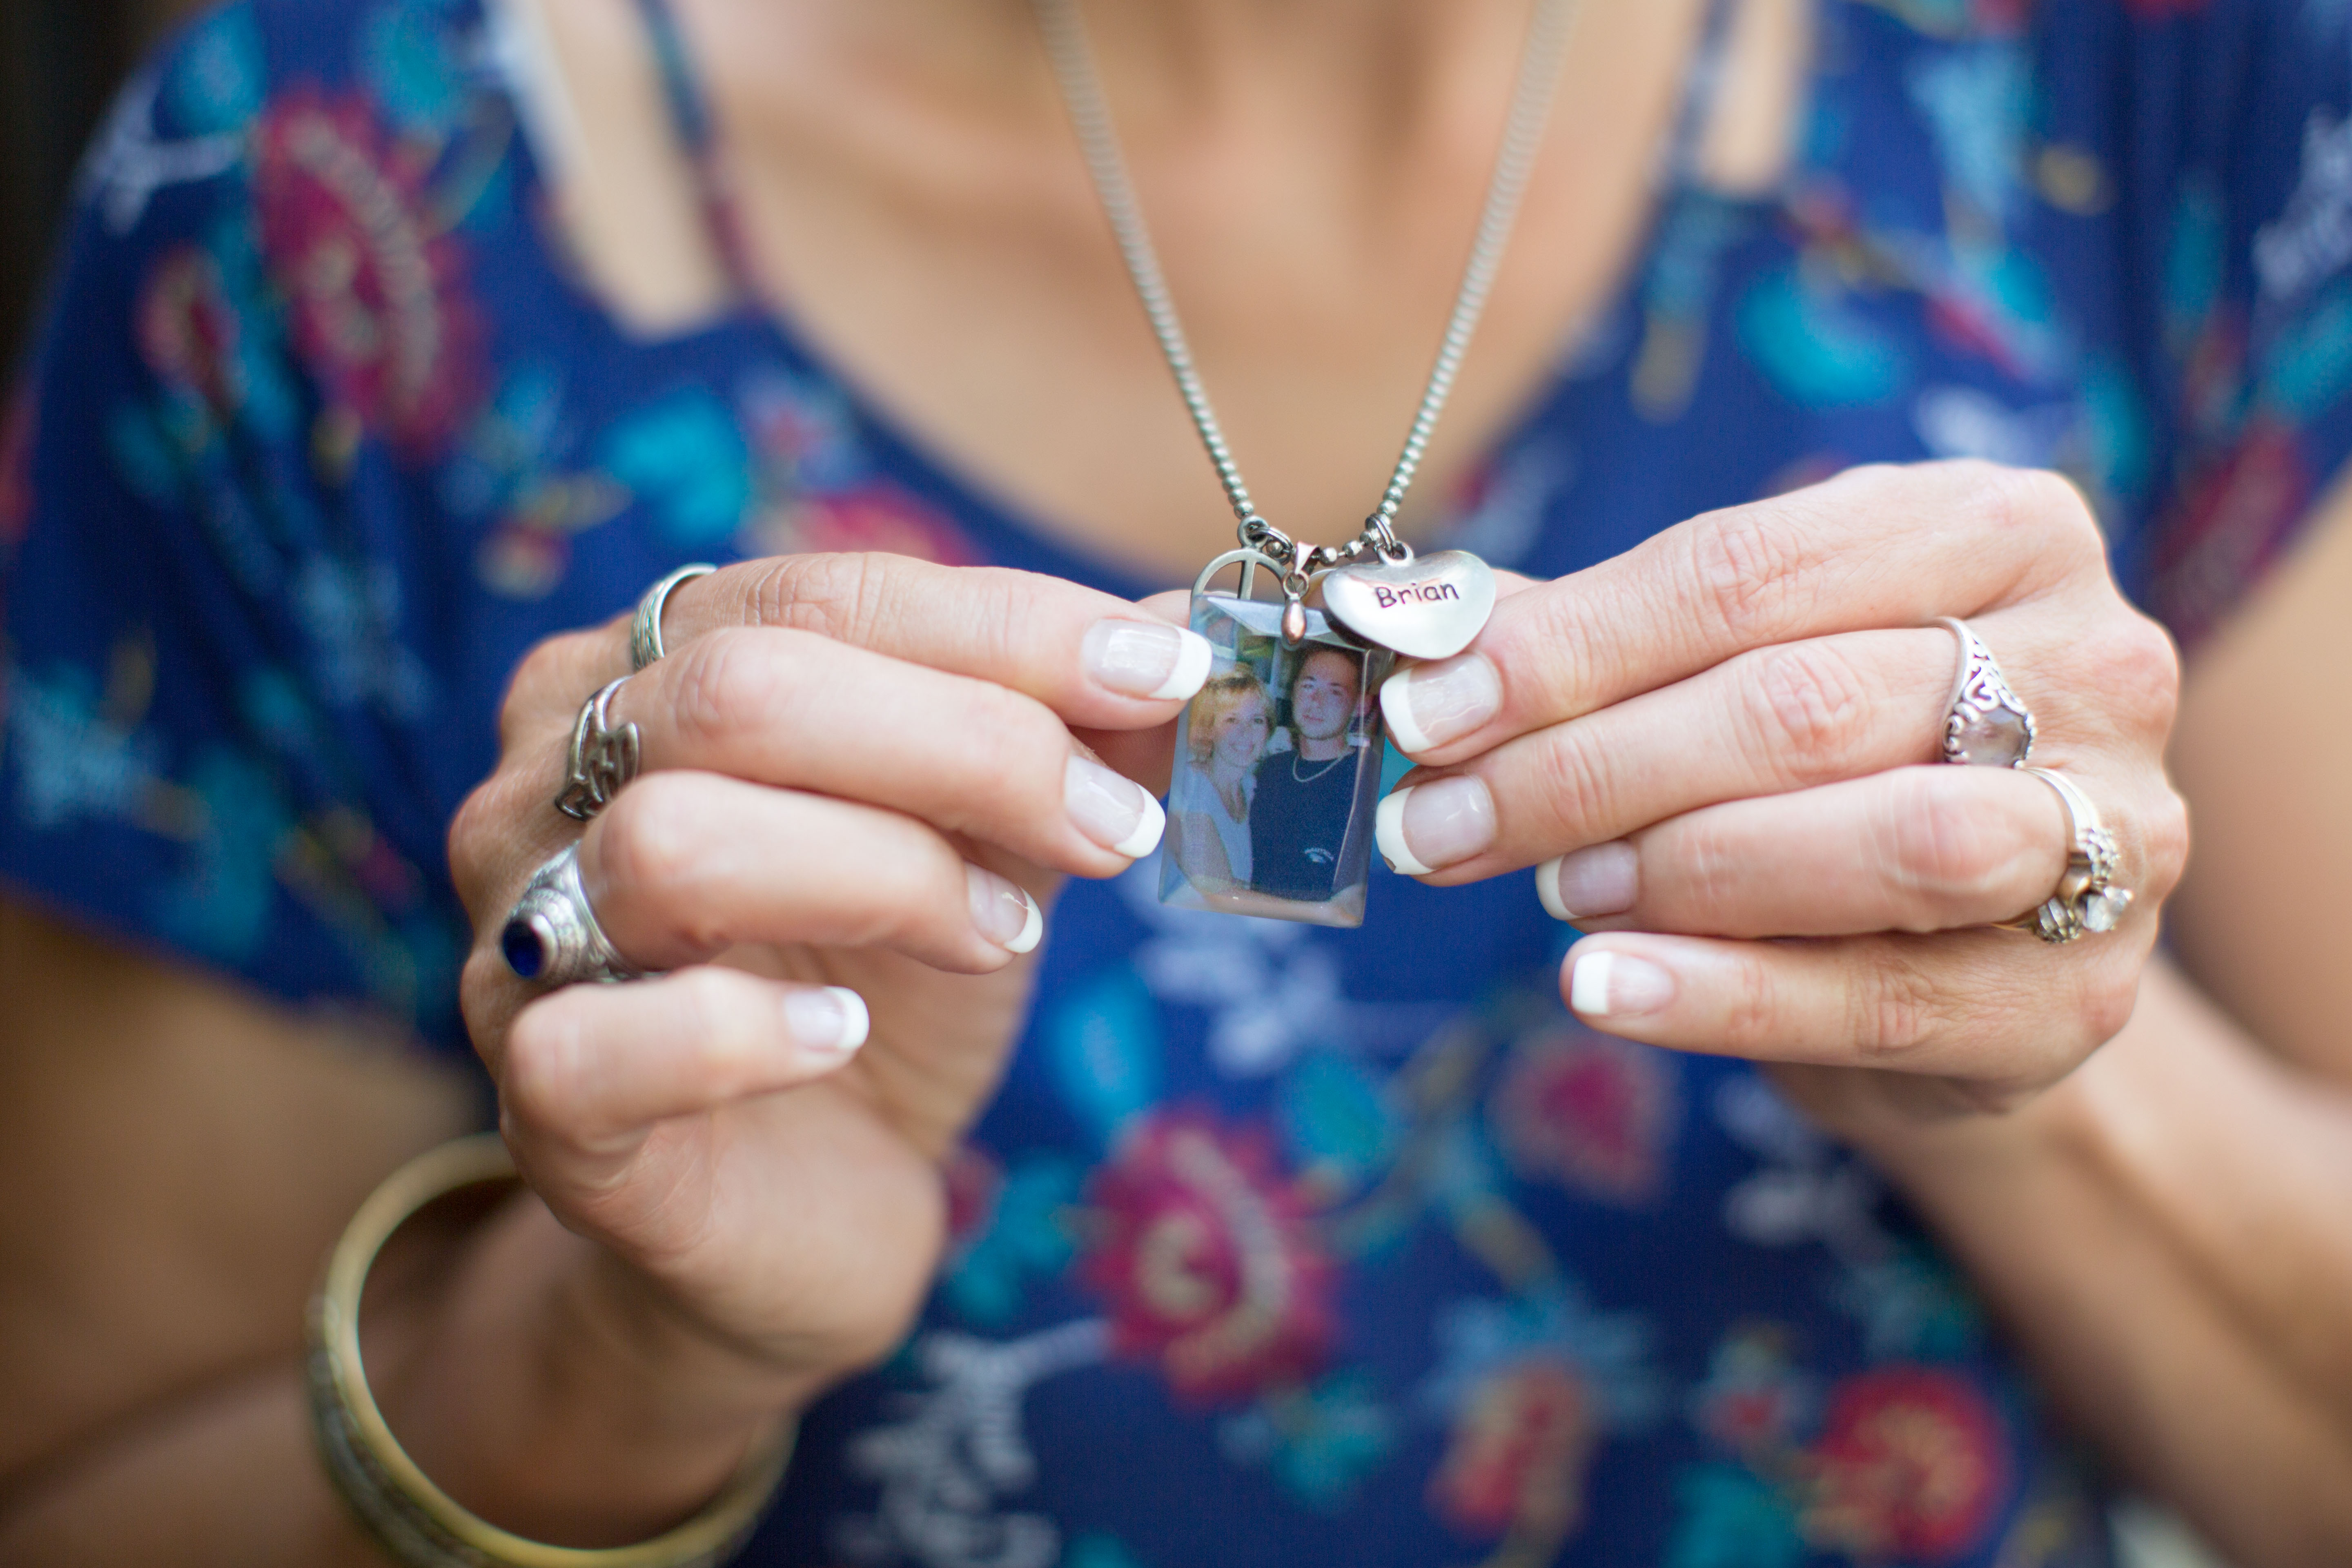 Lynda holds a her necklace toward the camera. On it, there's a photograph of her and her son Brian, along with a small heart trinket that shares his name. In the photo, her